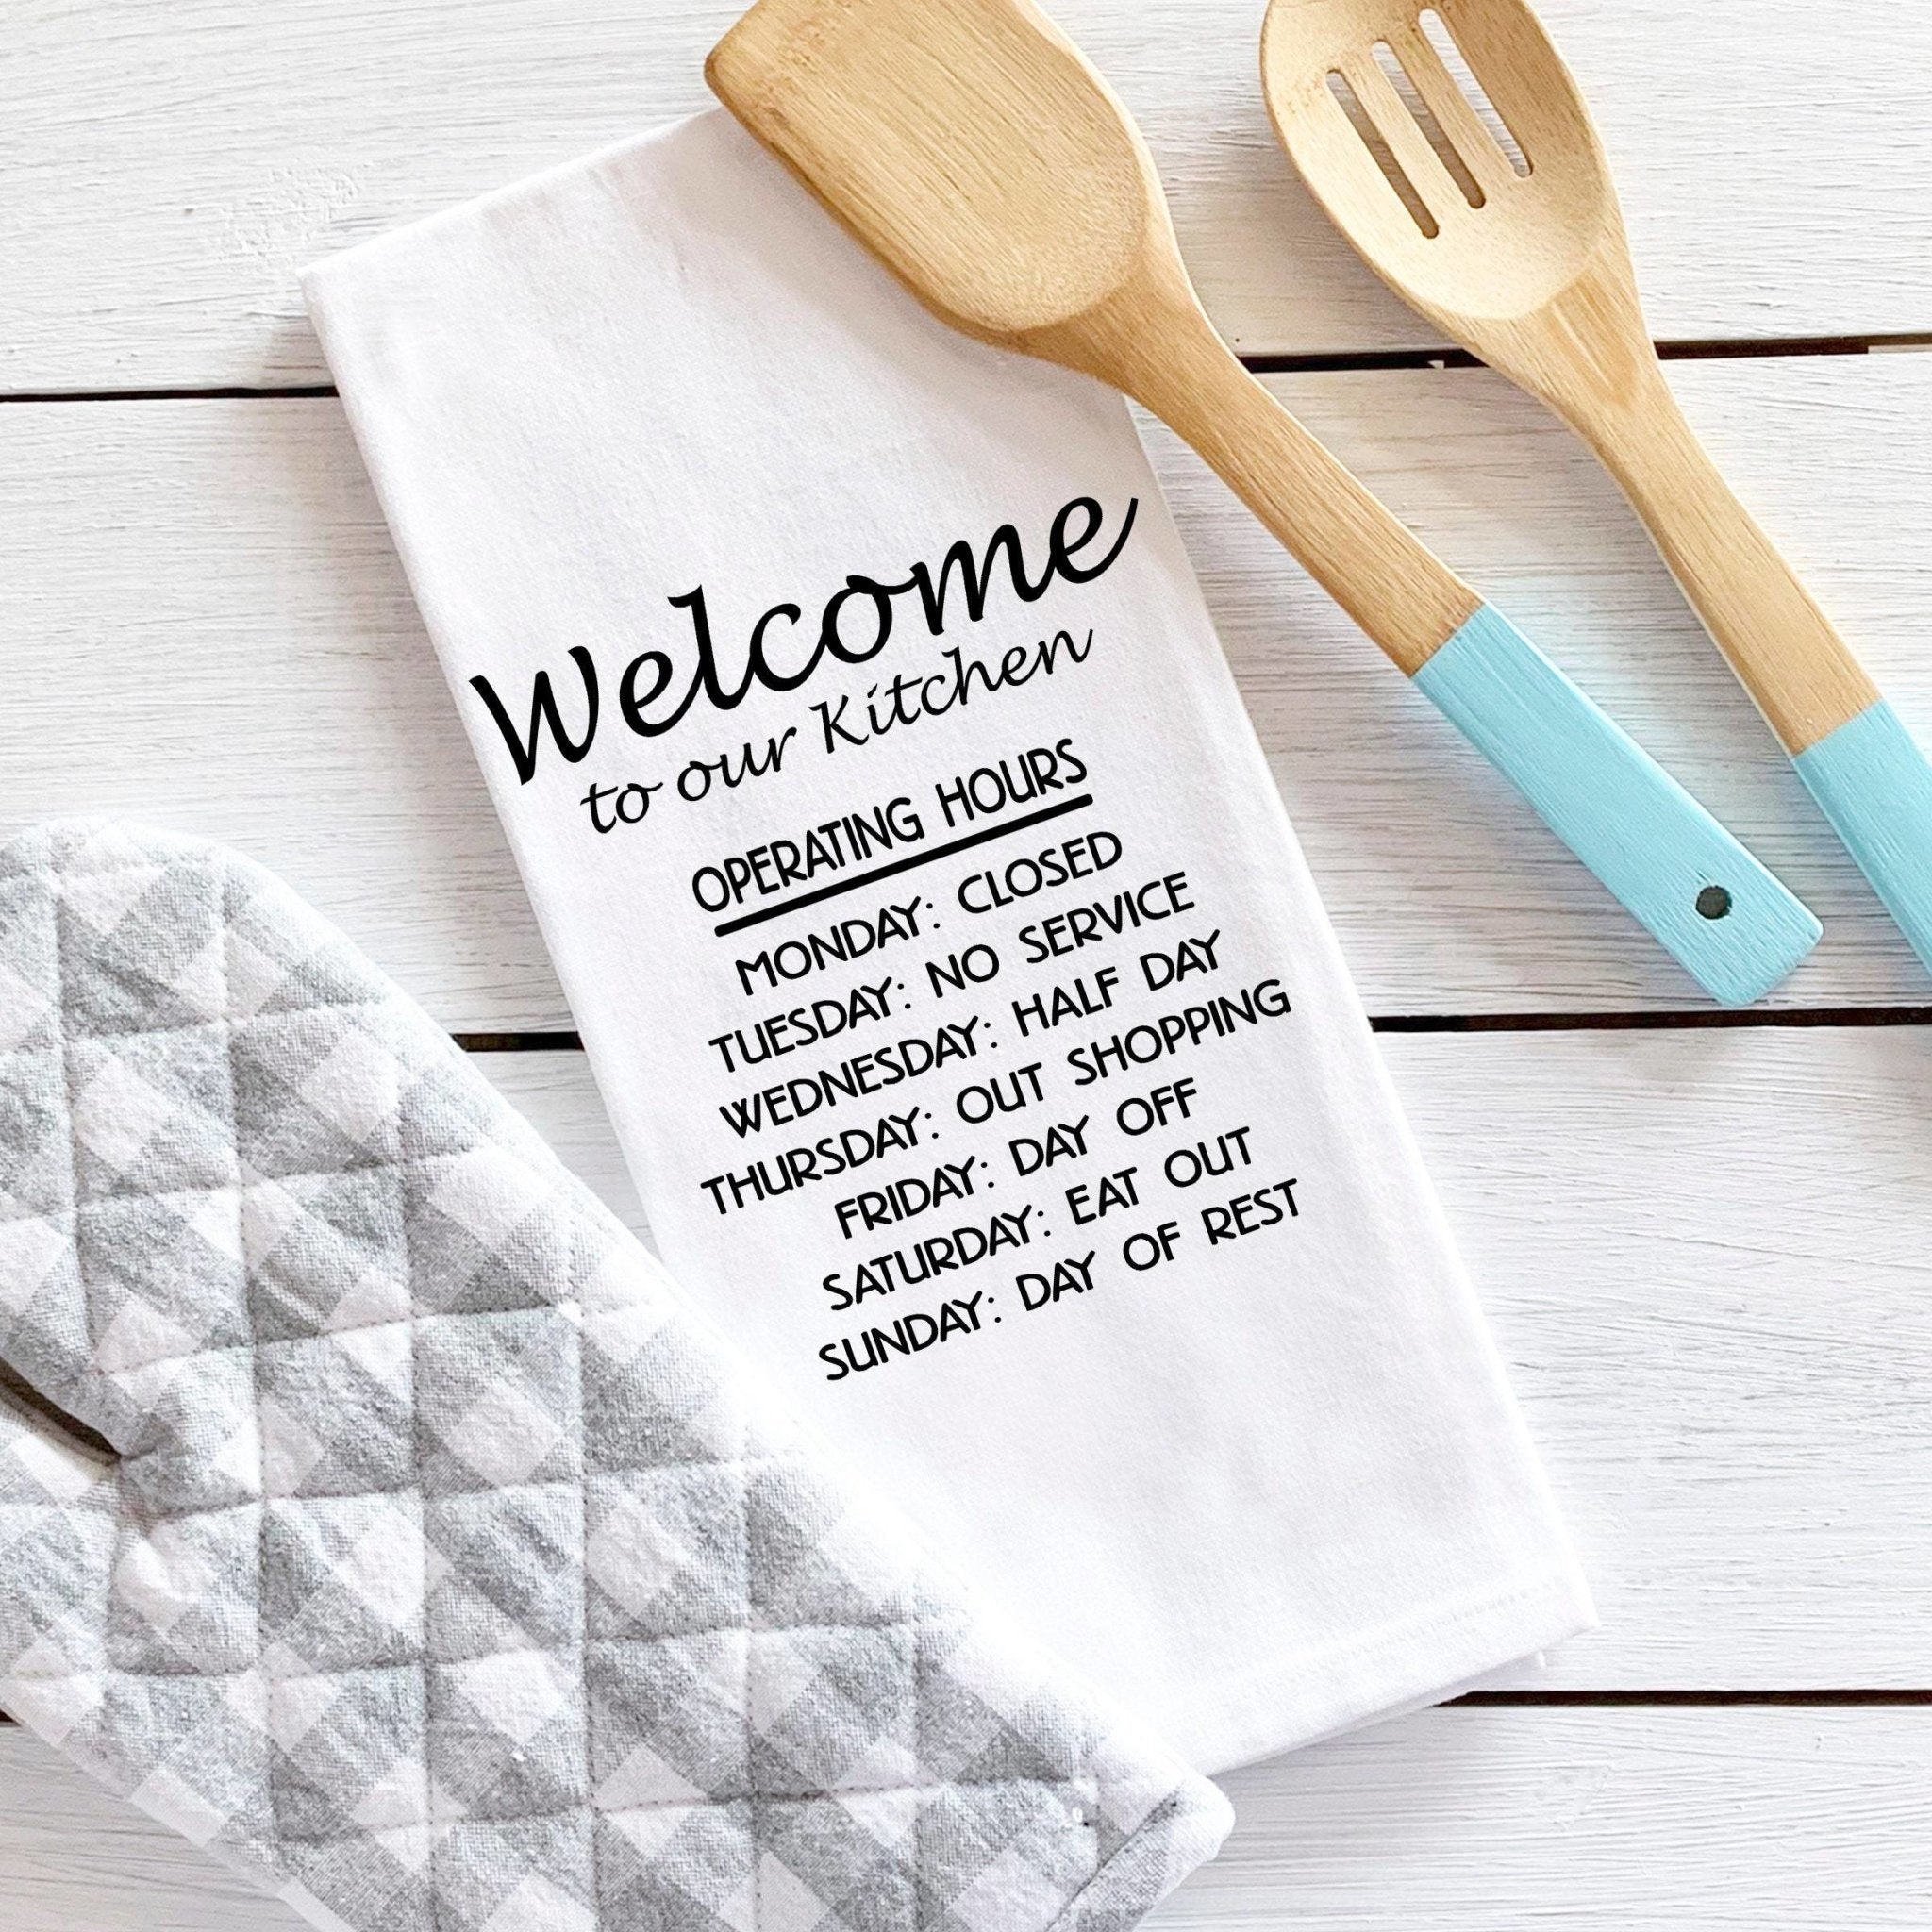 Funny Kitchen Tea Towels Decorative House Warming Gifts Home